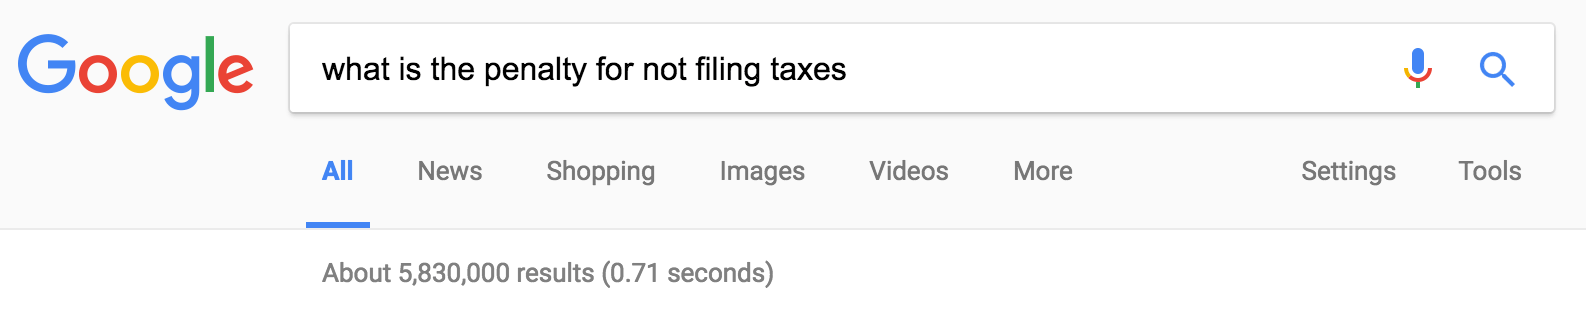 what-is-the-penalty-for-not-filing-taxes-google-search